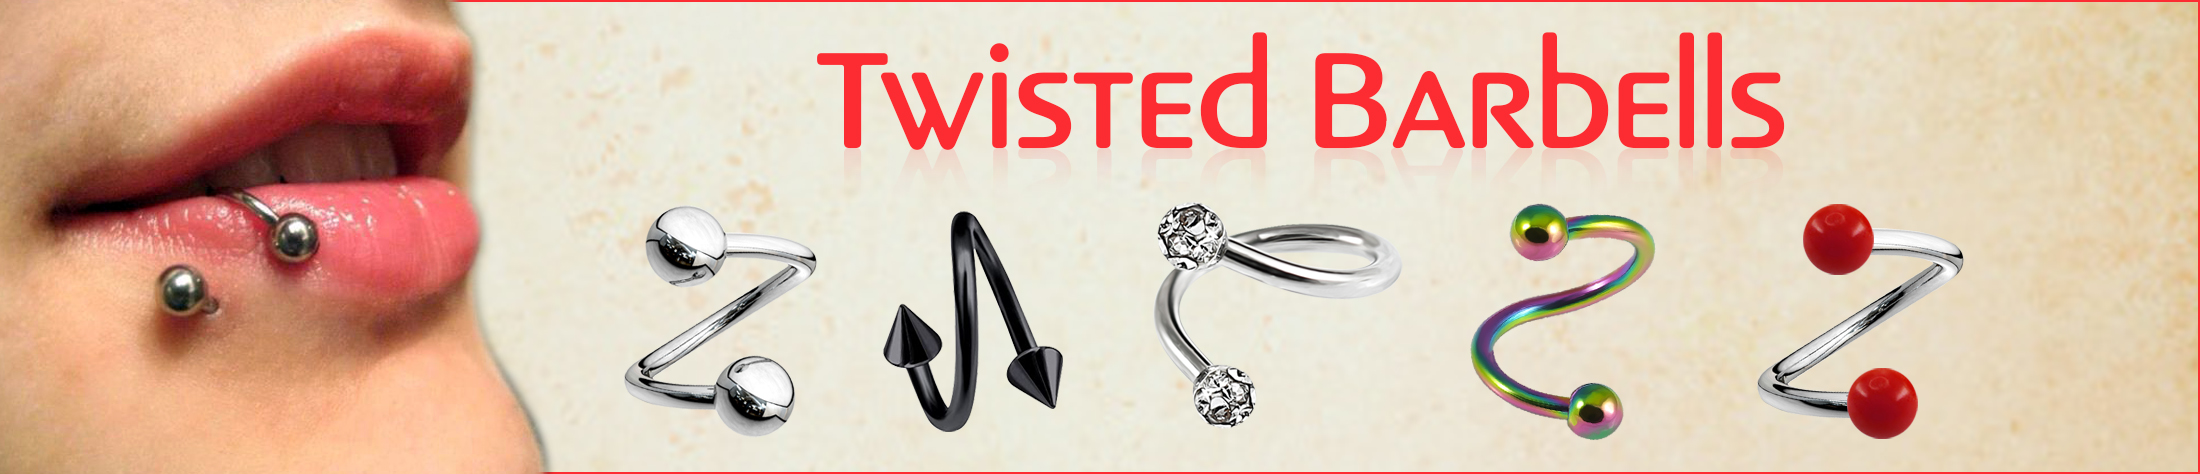 Wholesale Twisted Barbells